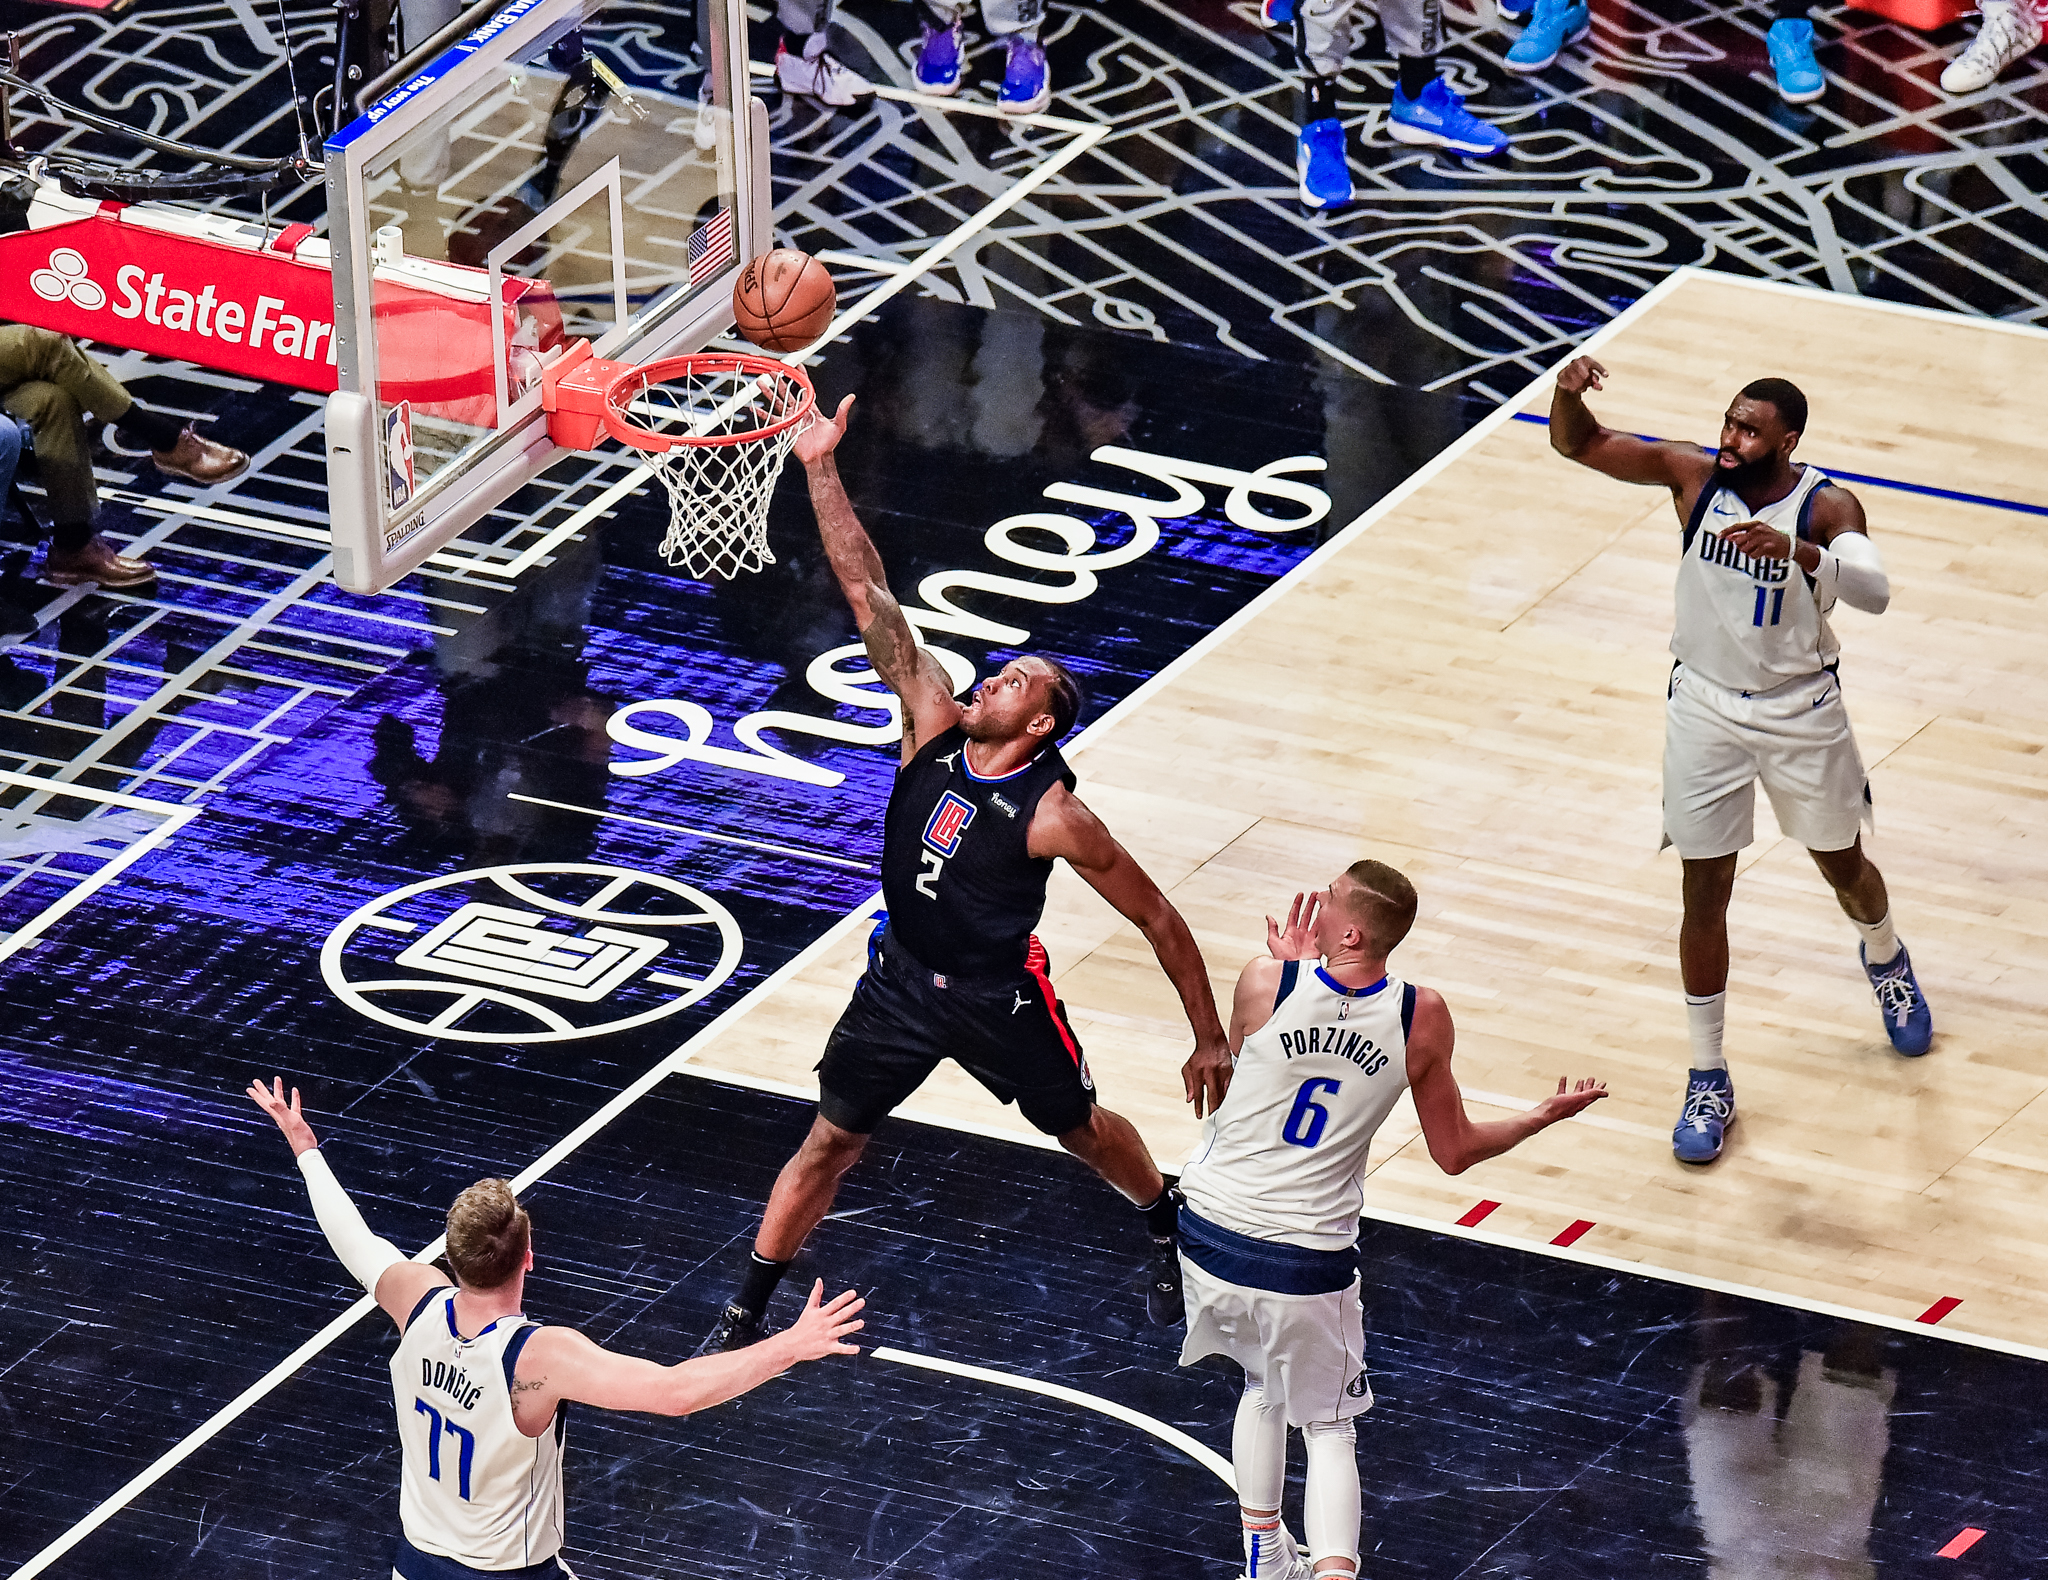 Kawhi Leonard (2) goes for 41 points in a 127-121 loss to the Dallas Mavericks in Game 2 at Staples Center. The Los Angeles Clippers are now down 0-2 to the Mavericks in the first round of the NBA playoff series between the two teams. Photo credit: Mark Hammond/News4usonline